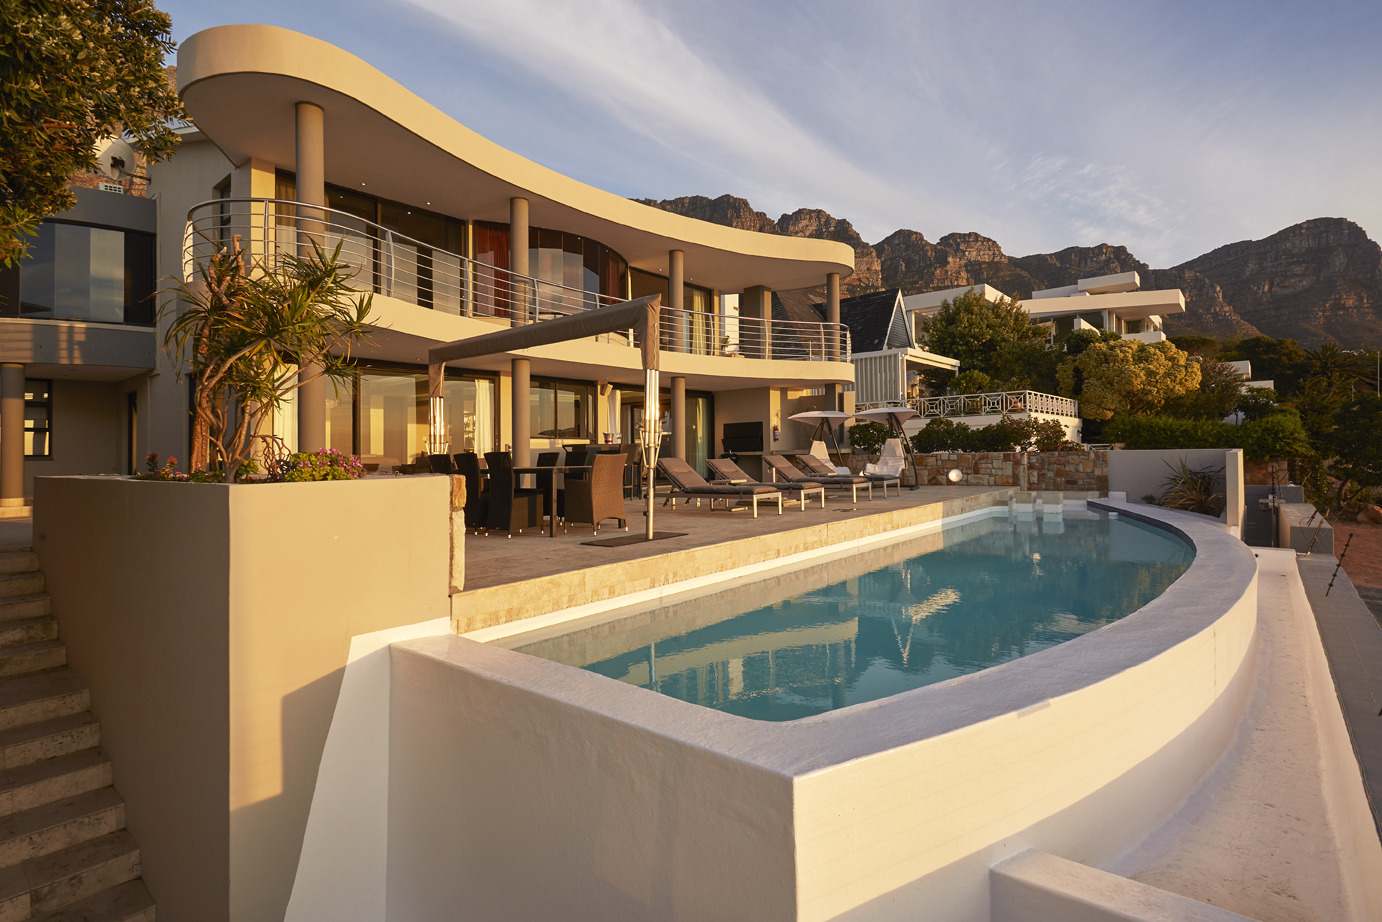 Photo 19 of Villa Waves accommodation in Camps Bay, Cape Town with 4 bedrooms and 4 bathrooms